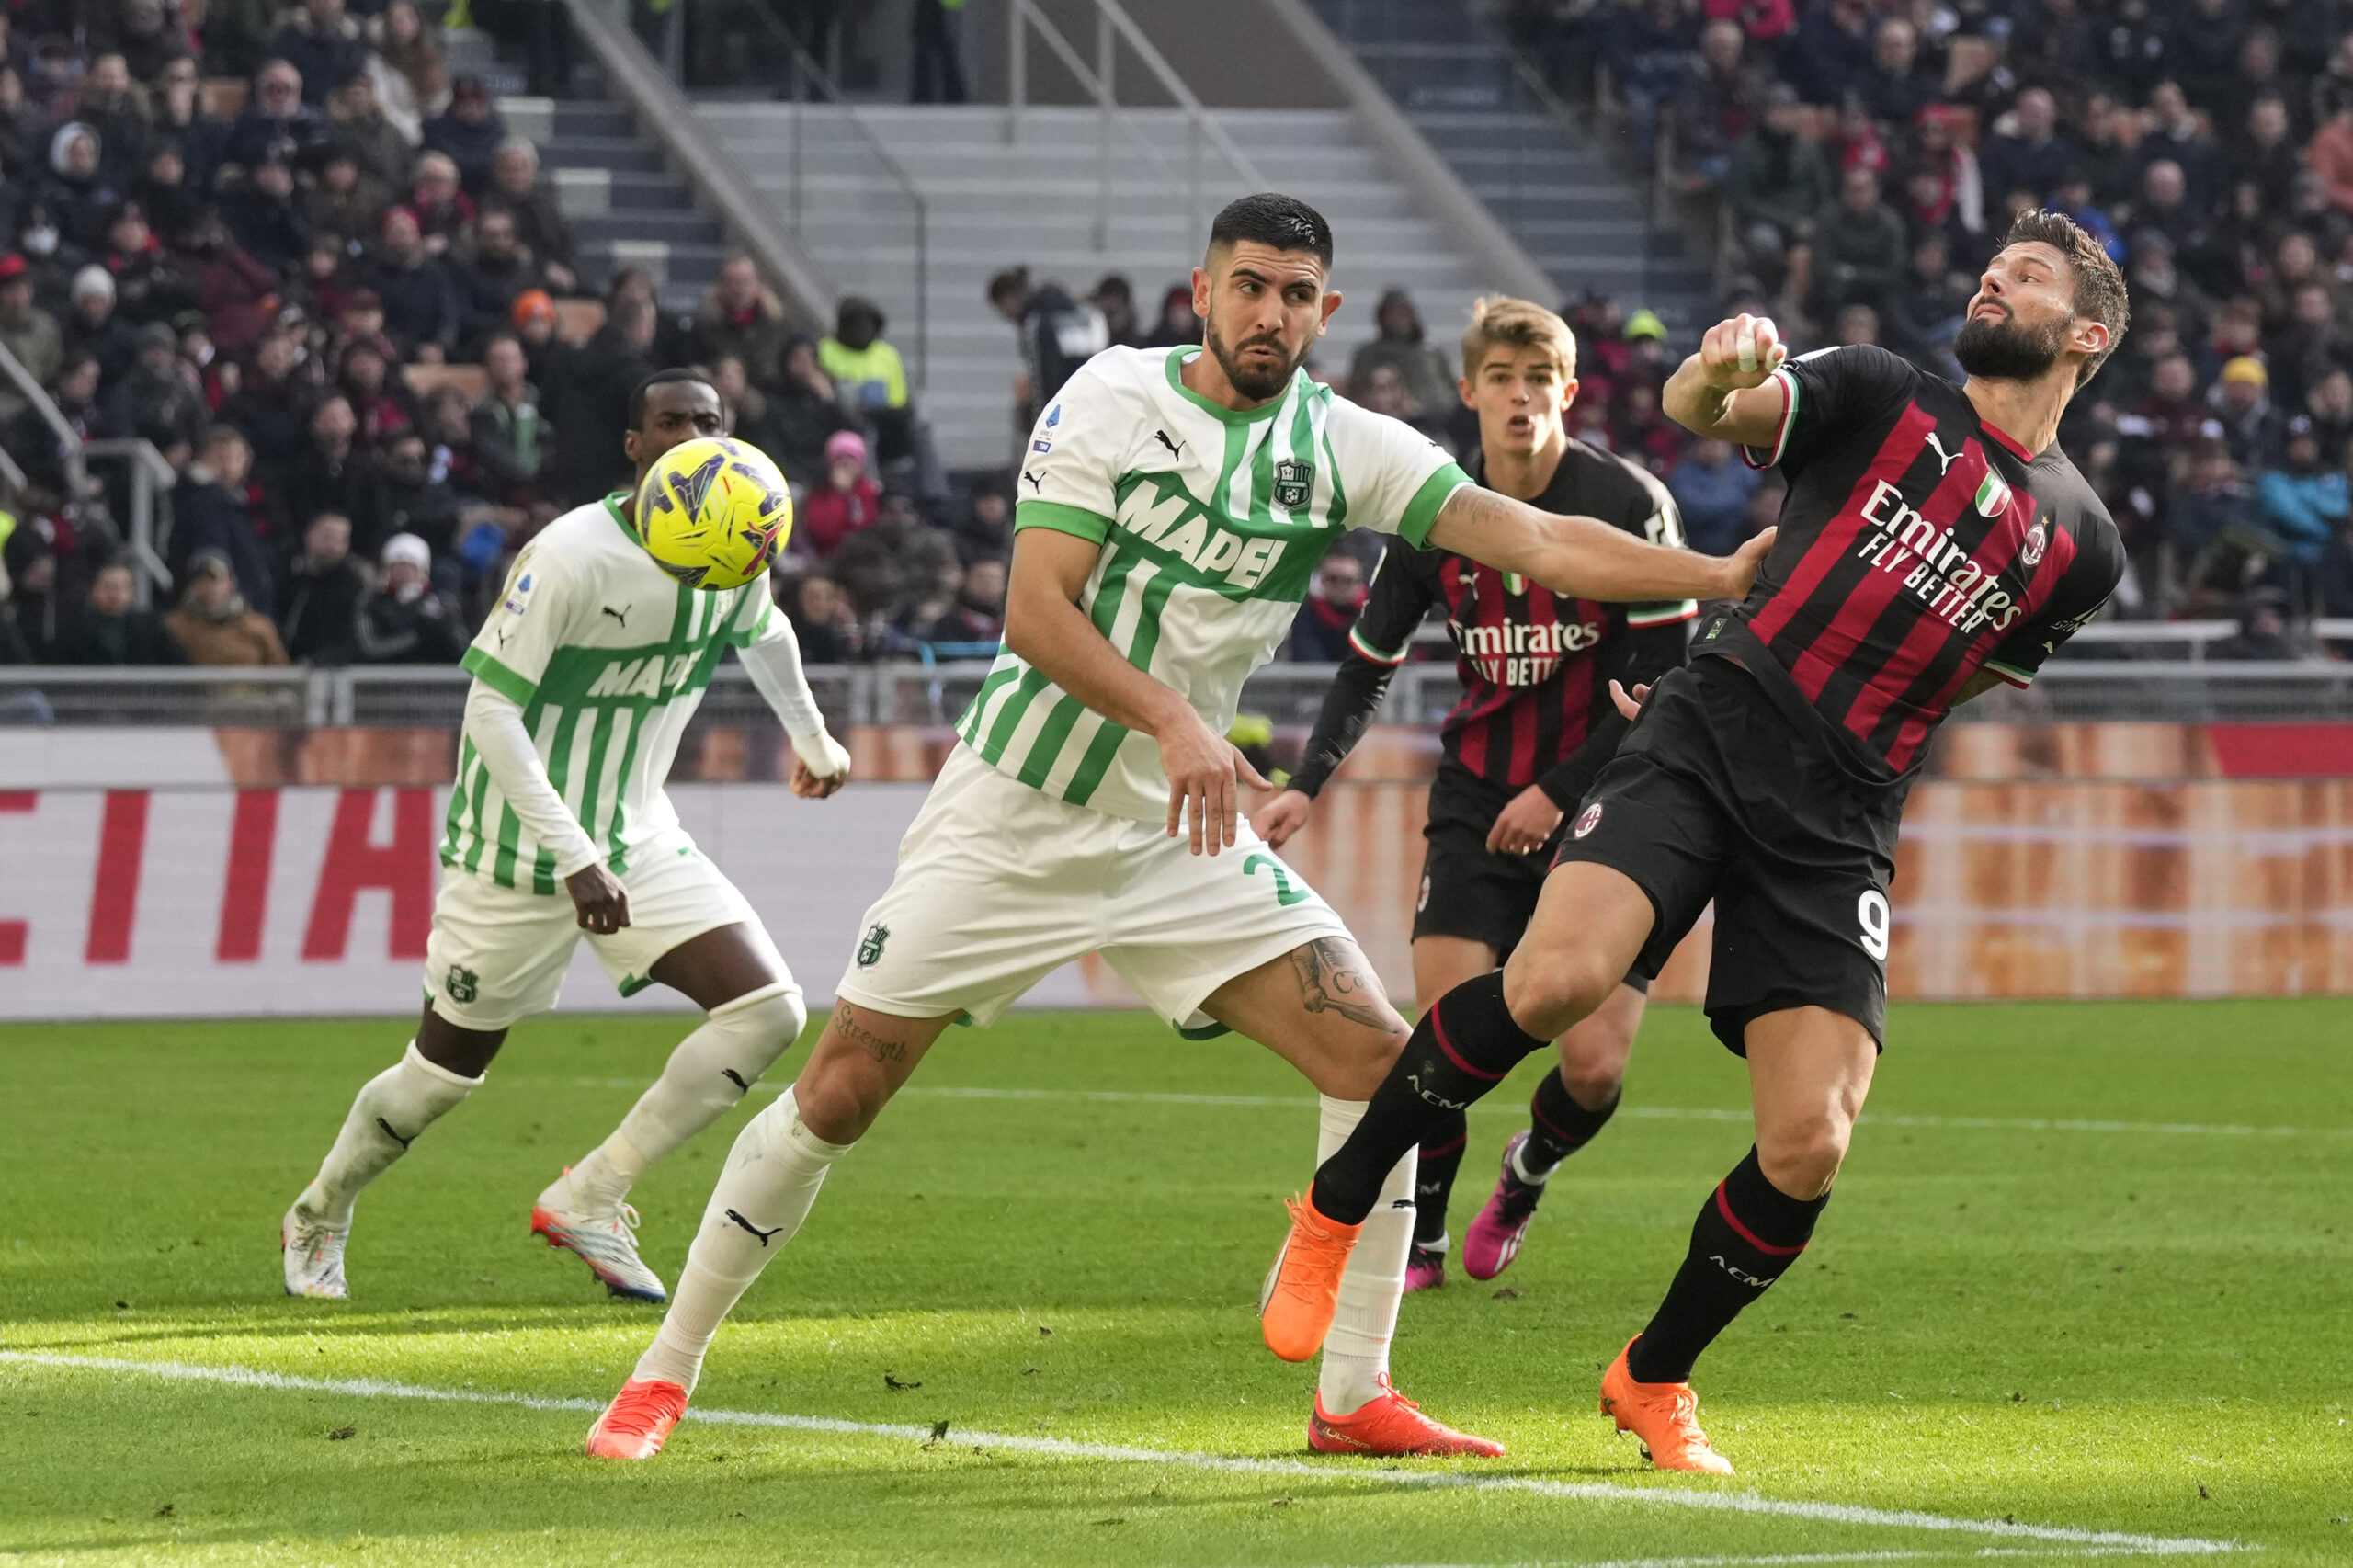 AC Milan's Olivier Giroud, right, and Sassuolo's Martin Erlic vie for the ball during a Serie A soccer match between AC Milan and Sassuolo at the San Siro stadium in Milan, Italy, Sunday, Jan. 29, 2023. (AP Photo/Antonio Calanni)